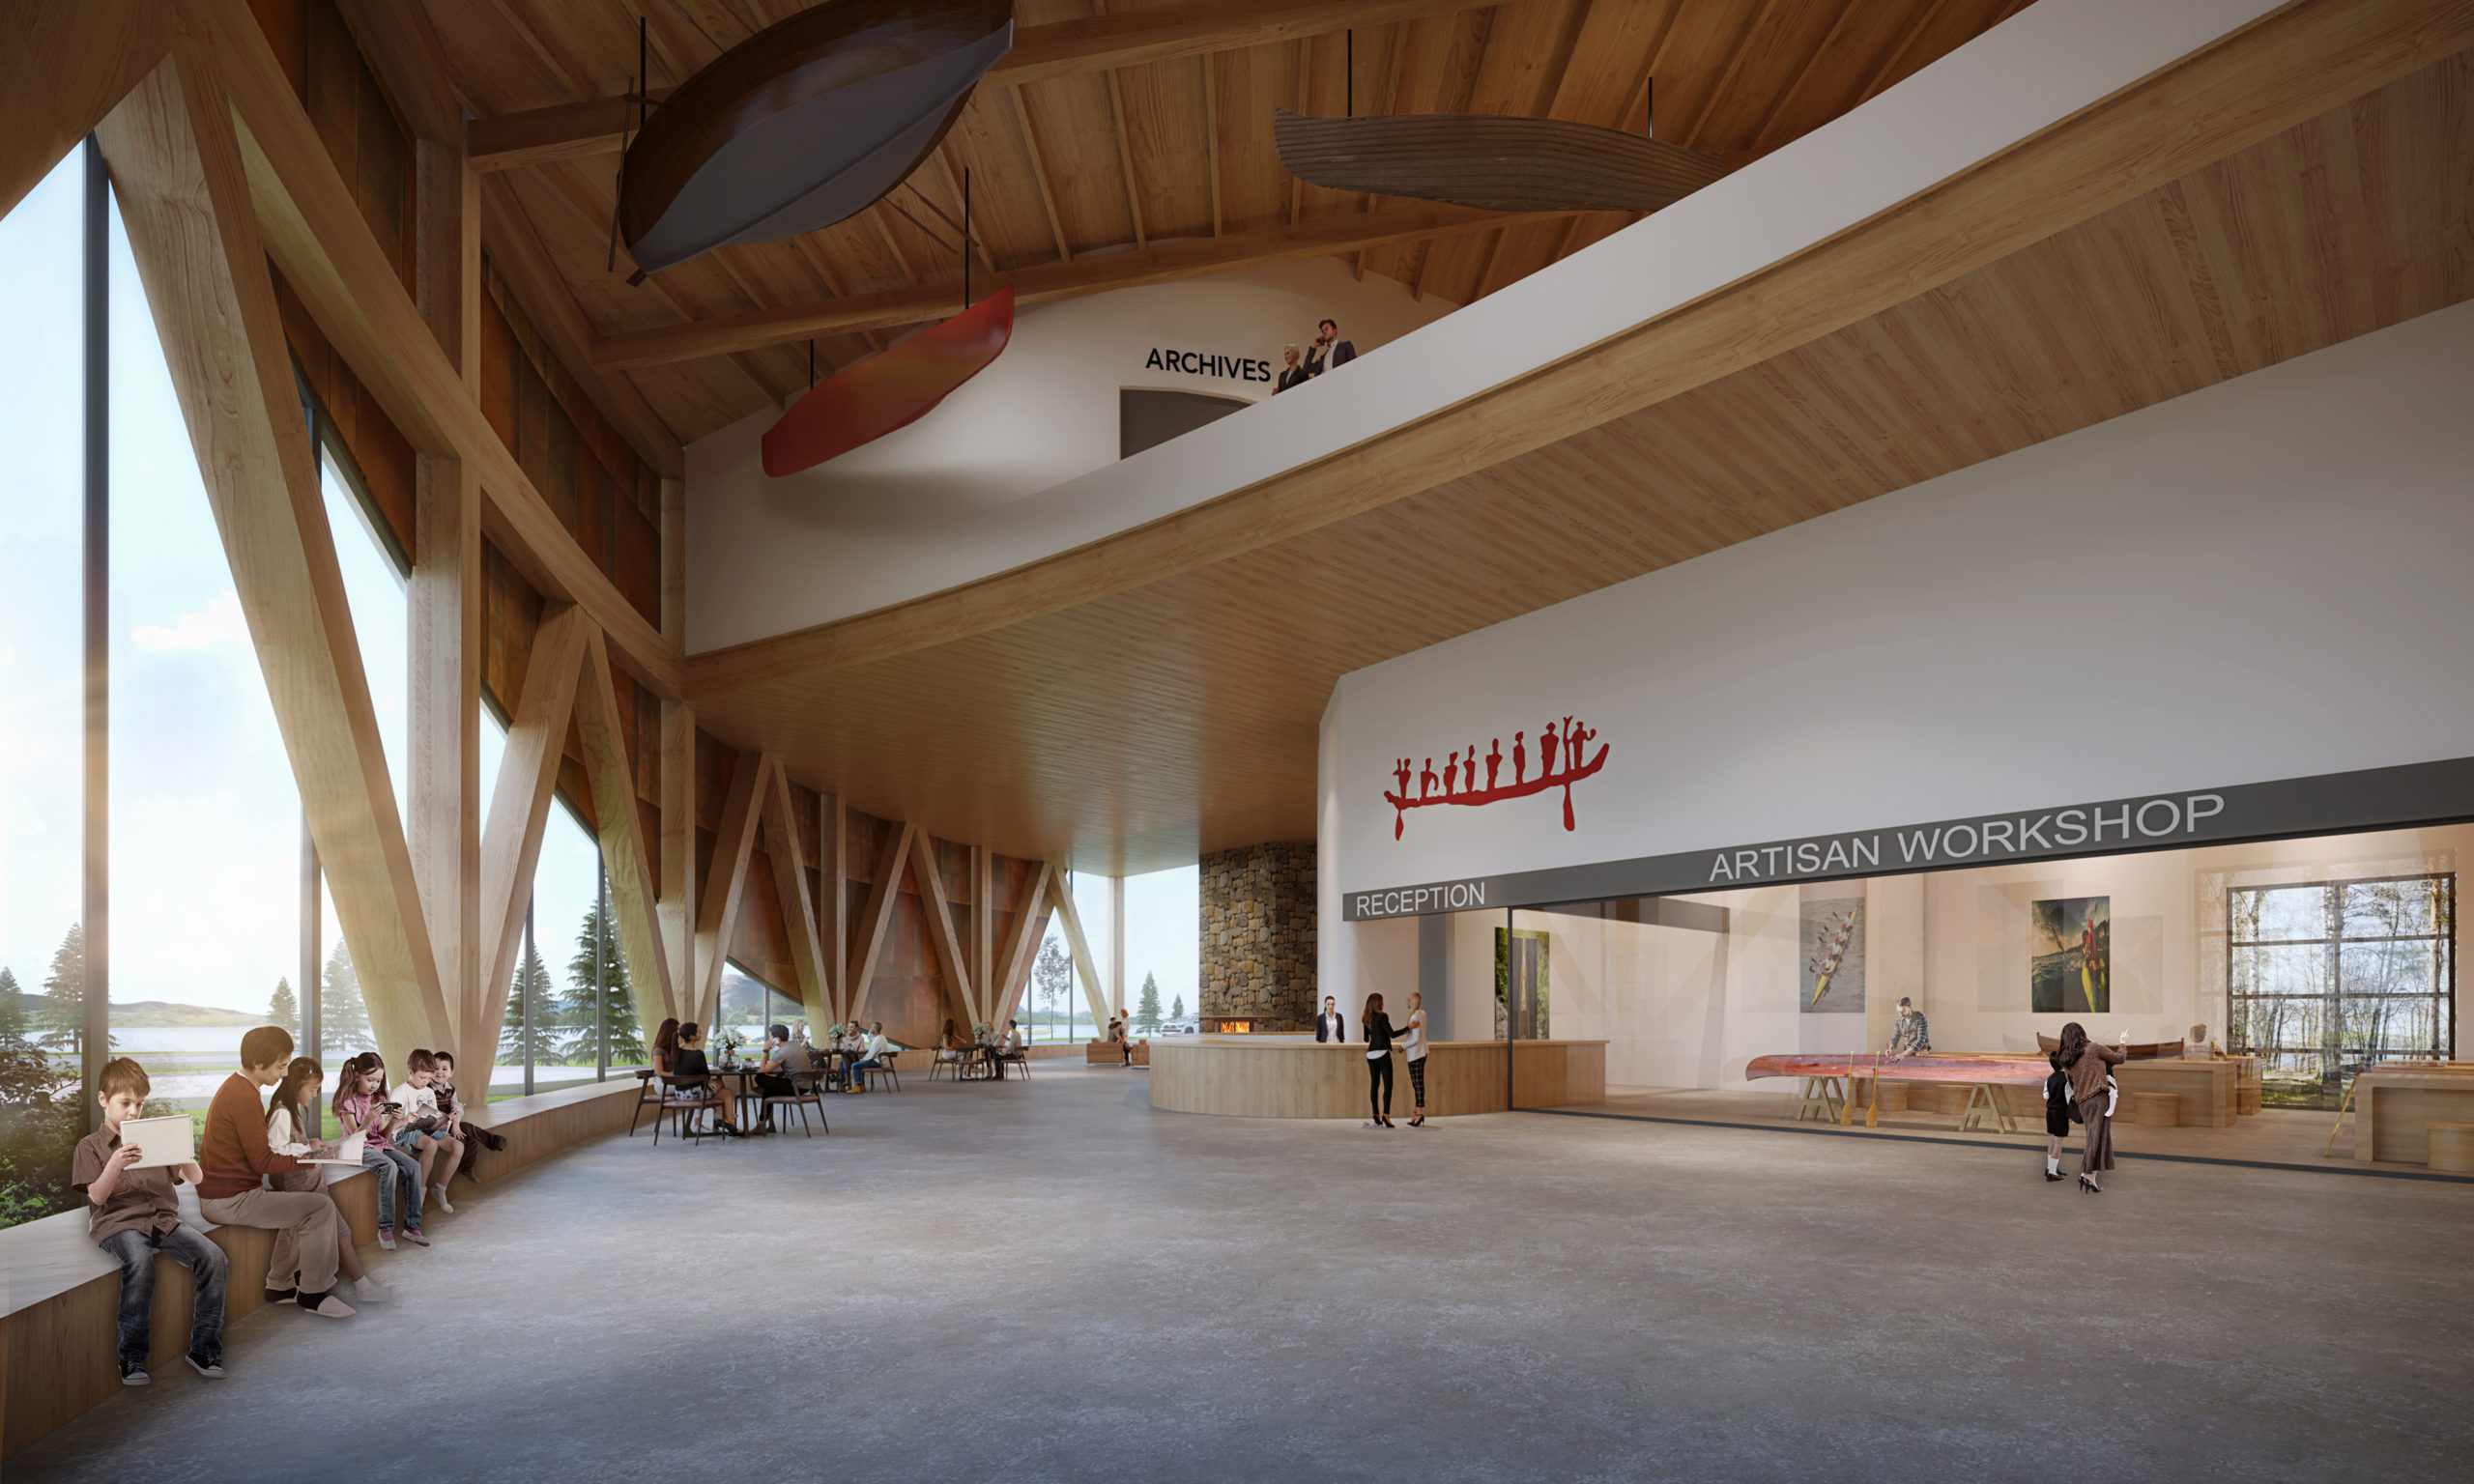 From the entrance of the Museum looking south, visitors experience the impressive, curved façade of the building and get a glimpse of the large fireplace in the café lounge. | Photo: The Canadian Canoe Museum